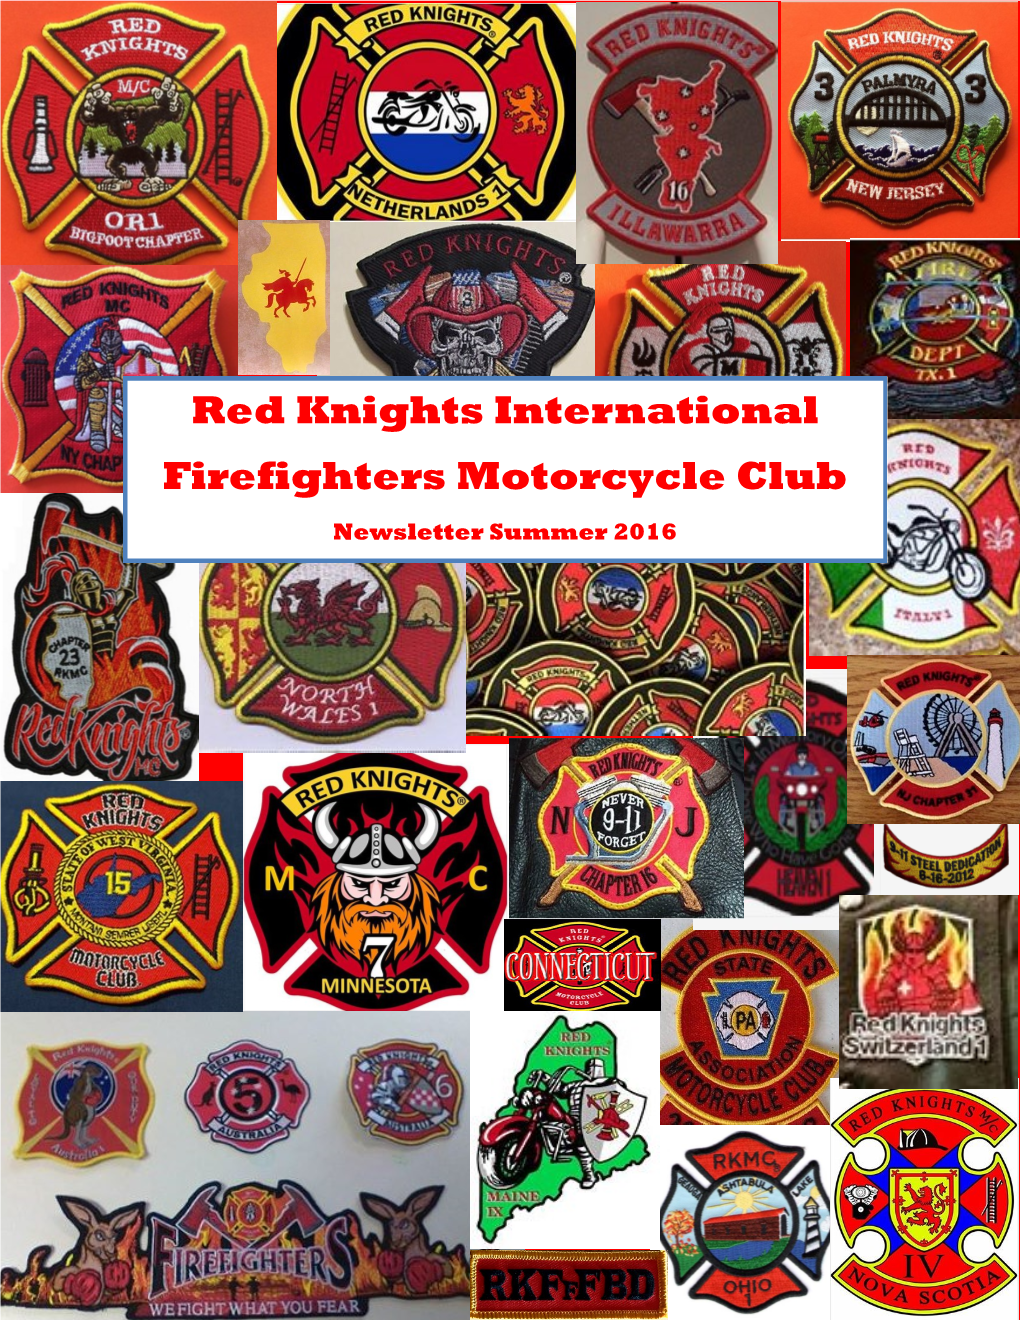 Red Knights International Firefighters Motorcycle Club